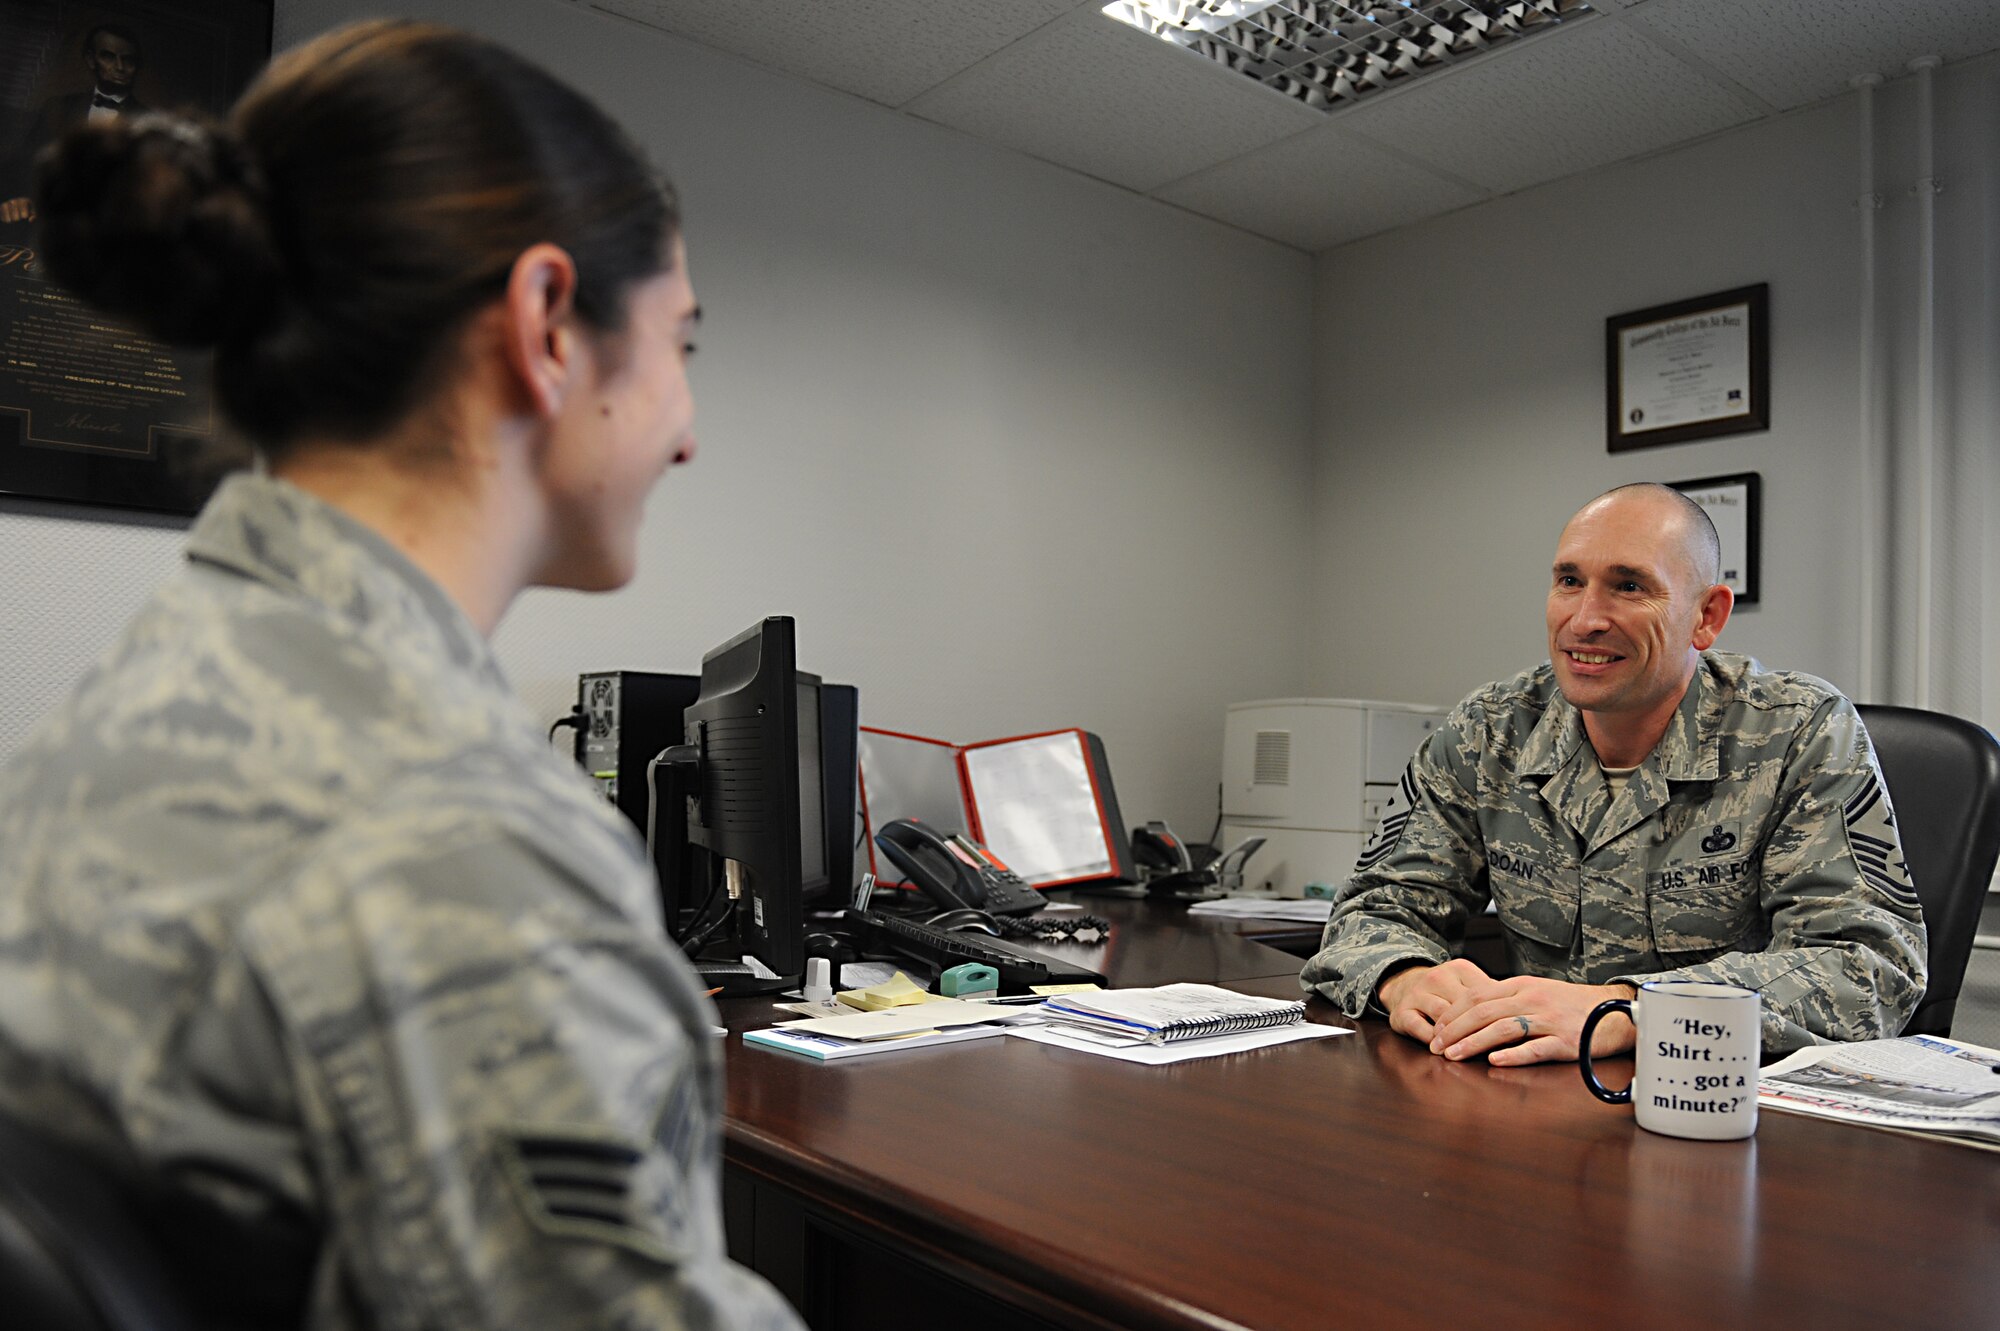 Senior Airman Sarah Root, 86th Aeromedical Squadron flight medicine technician, speaks to Senior Master Sgt. Charles Doan, 86th Medical Group first sergeant, in his office on Ramstein Air Base, Germany, Nov. 16, 2012. The first sergeants use knowledge, experience and skill to guide Airmen in the right direction around the Air Force. (U.S. Air Force photo/Airman 1st Class Holly Cook)